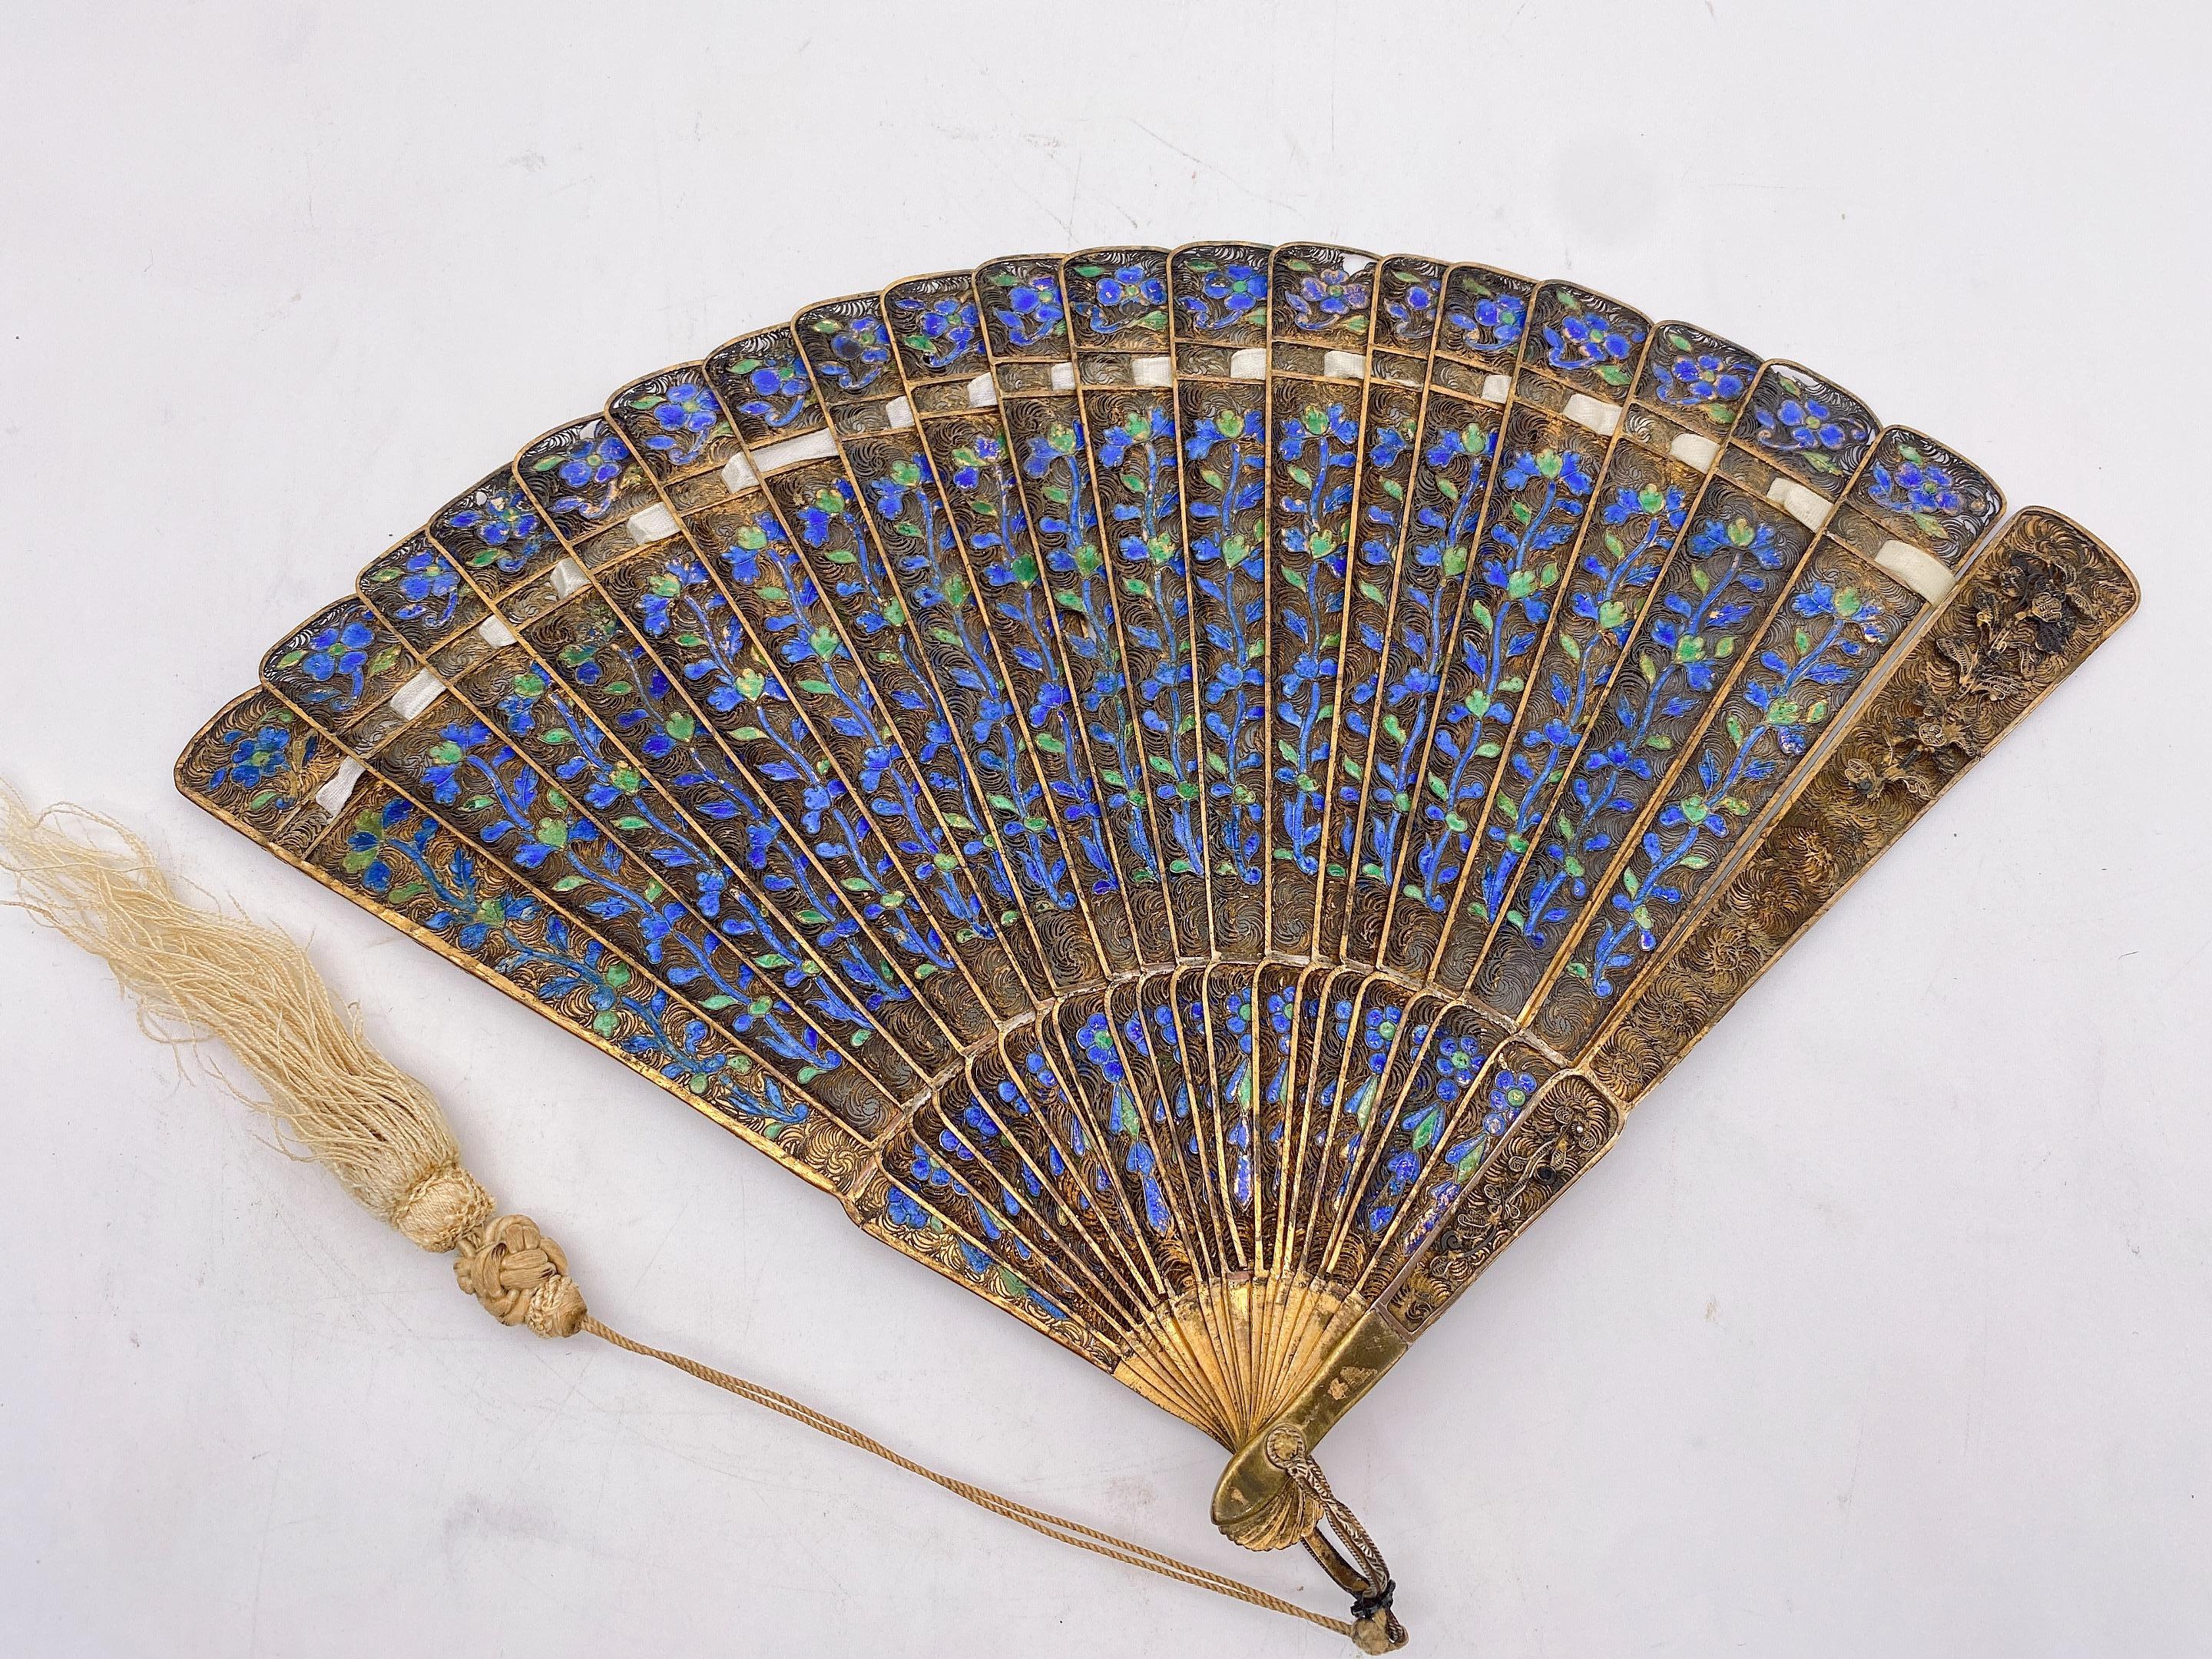 Qing Rare Unique 17th Century Chinese Gilt Silver Filigree and Enamel Brise Fan For Sale